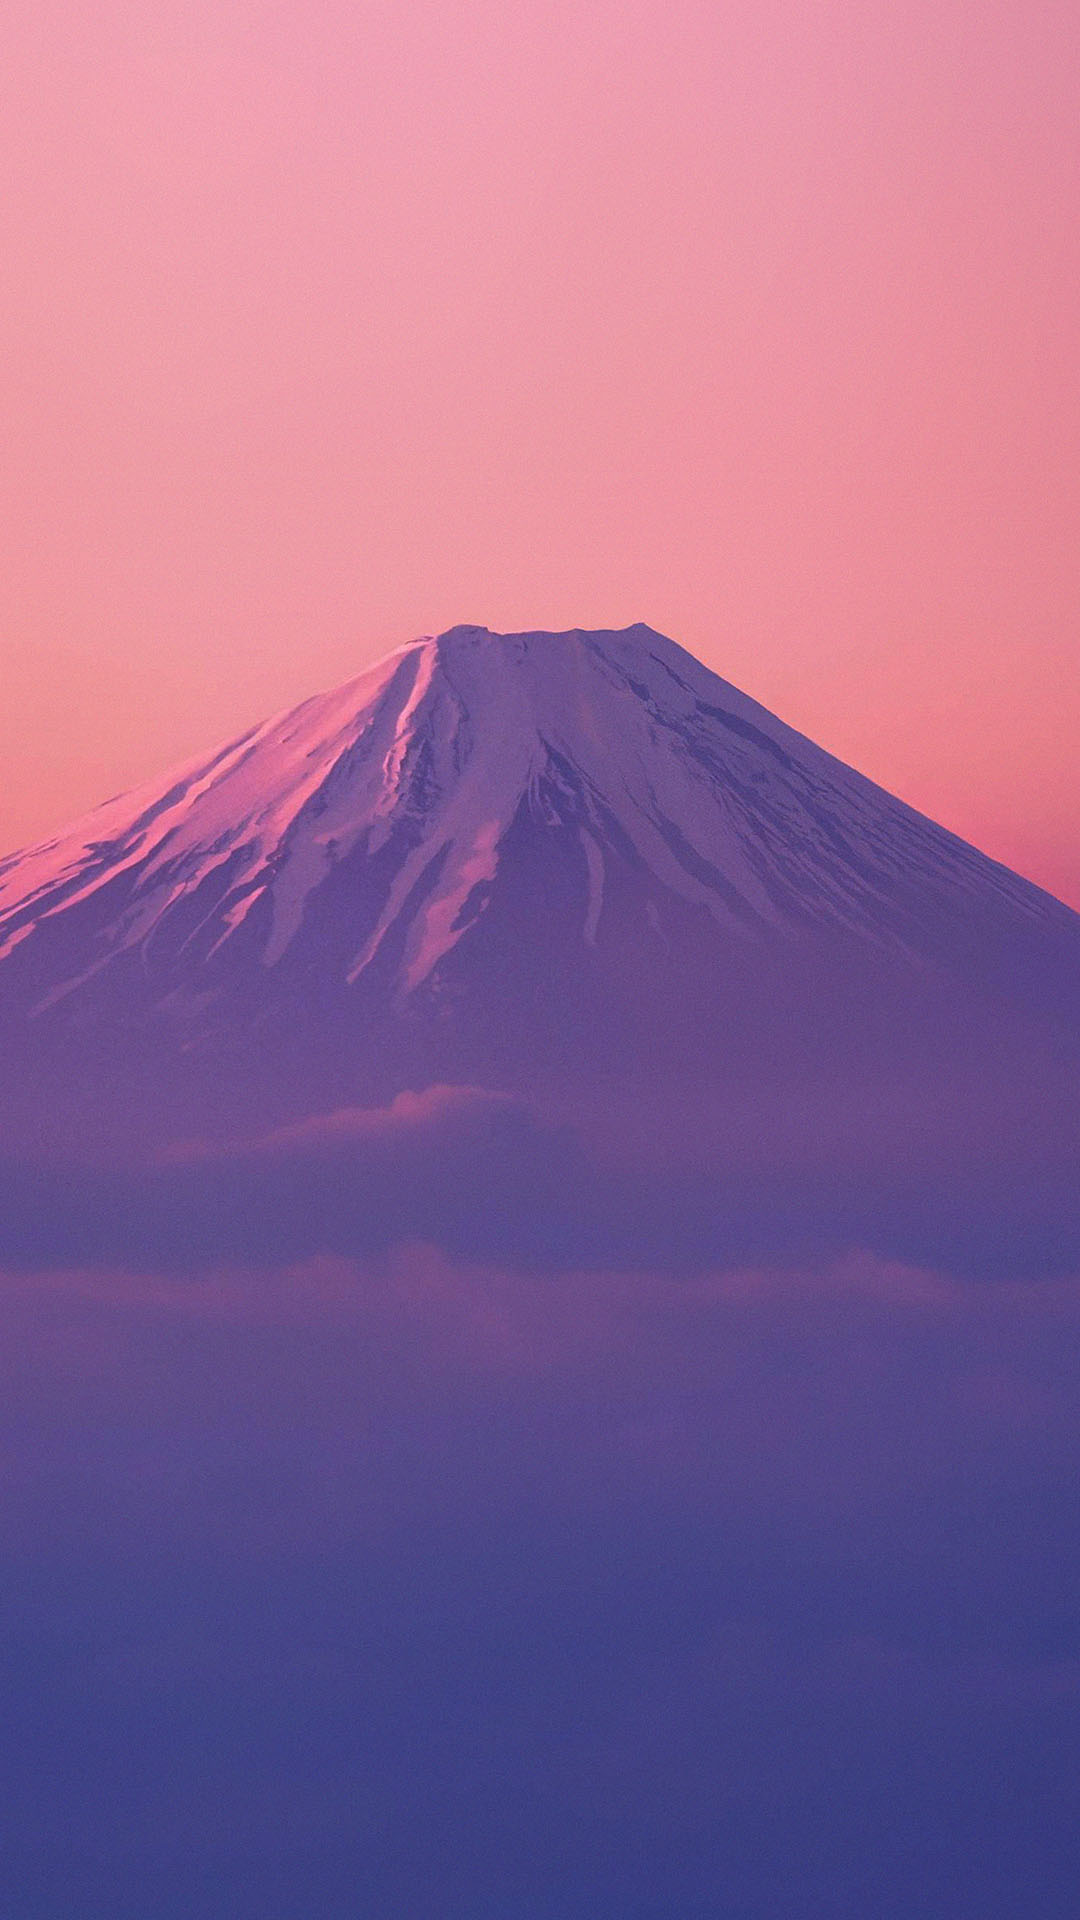 mountain wallpaper for android,sky,stratovolcano,violet,purple,extinct volcano